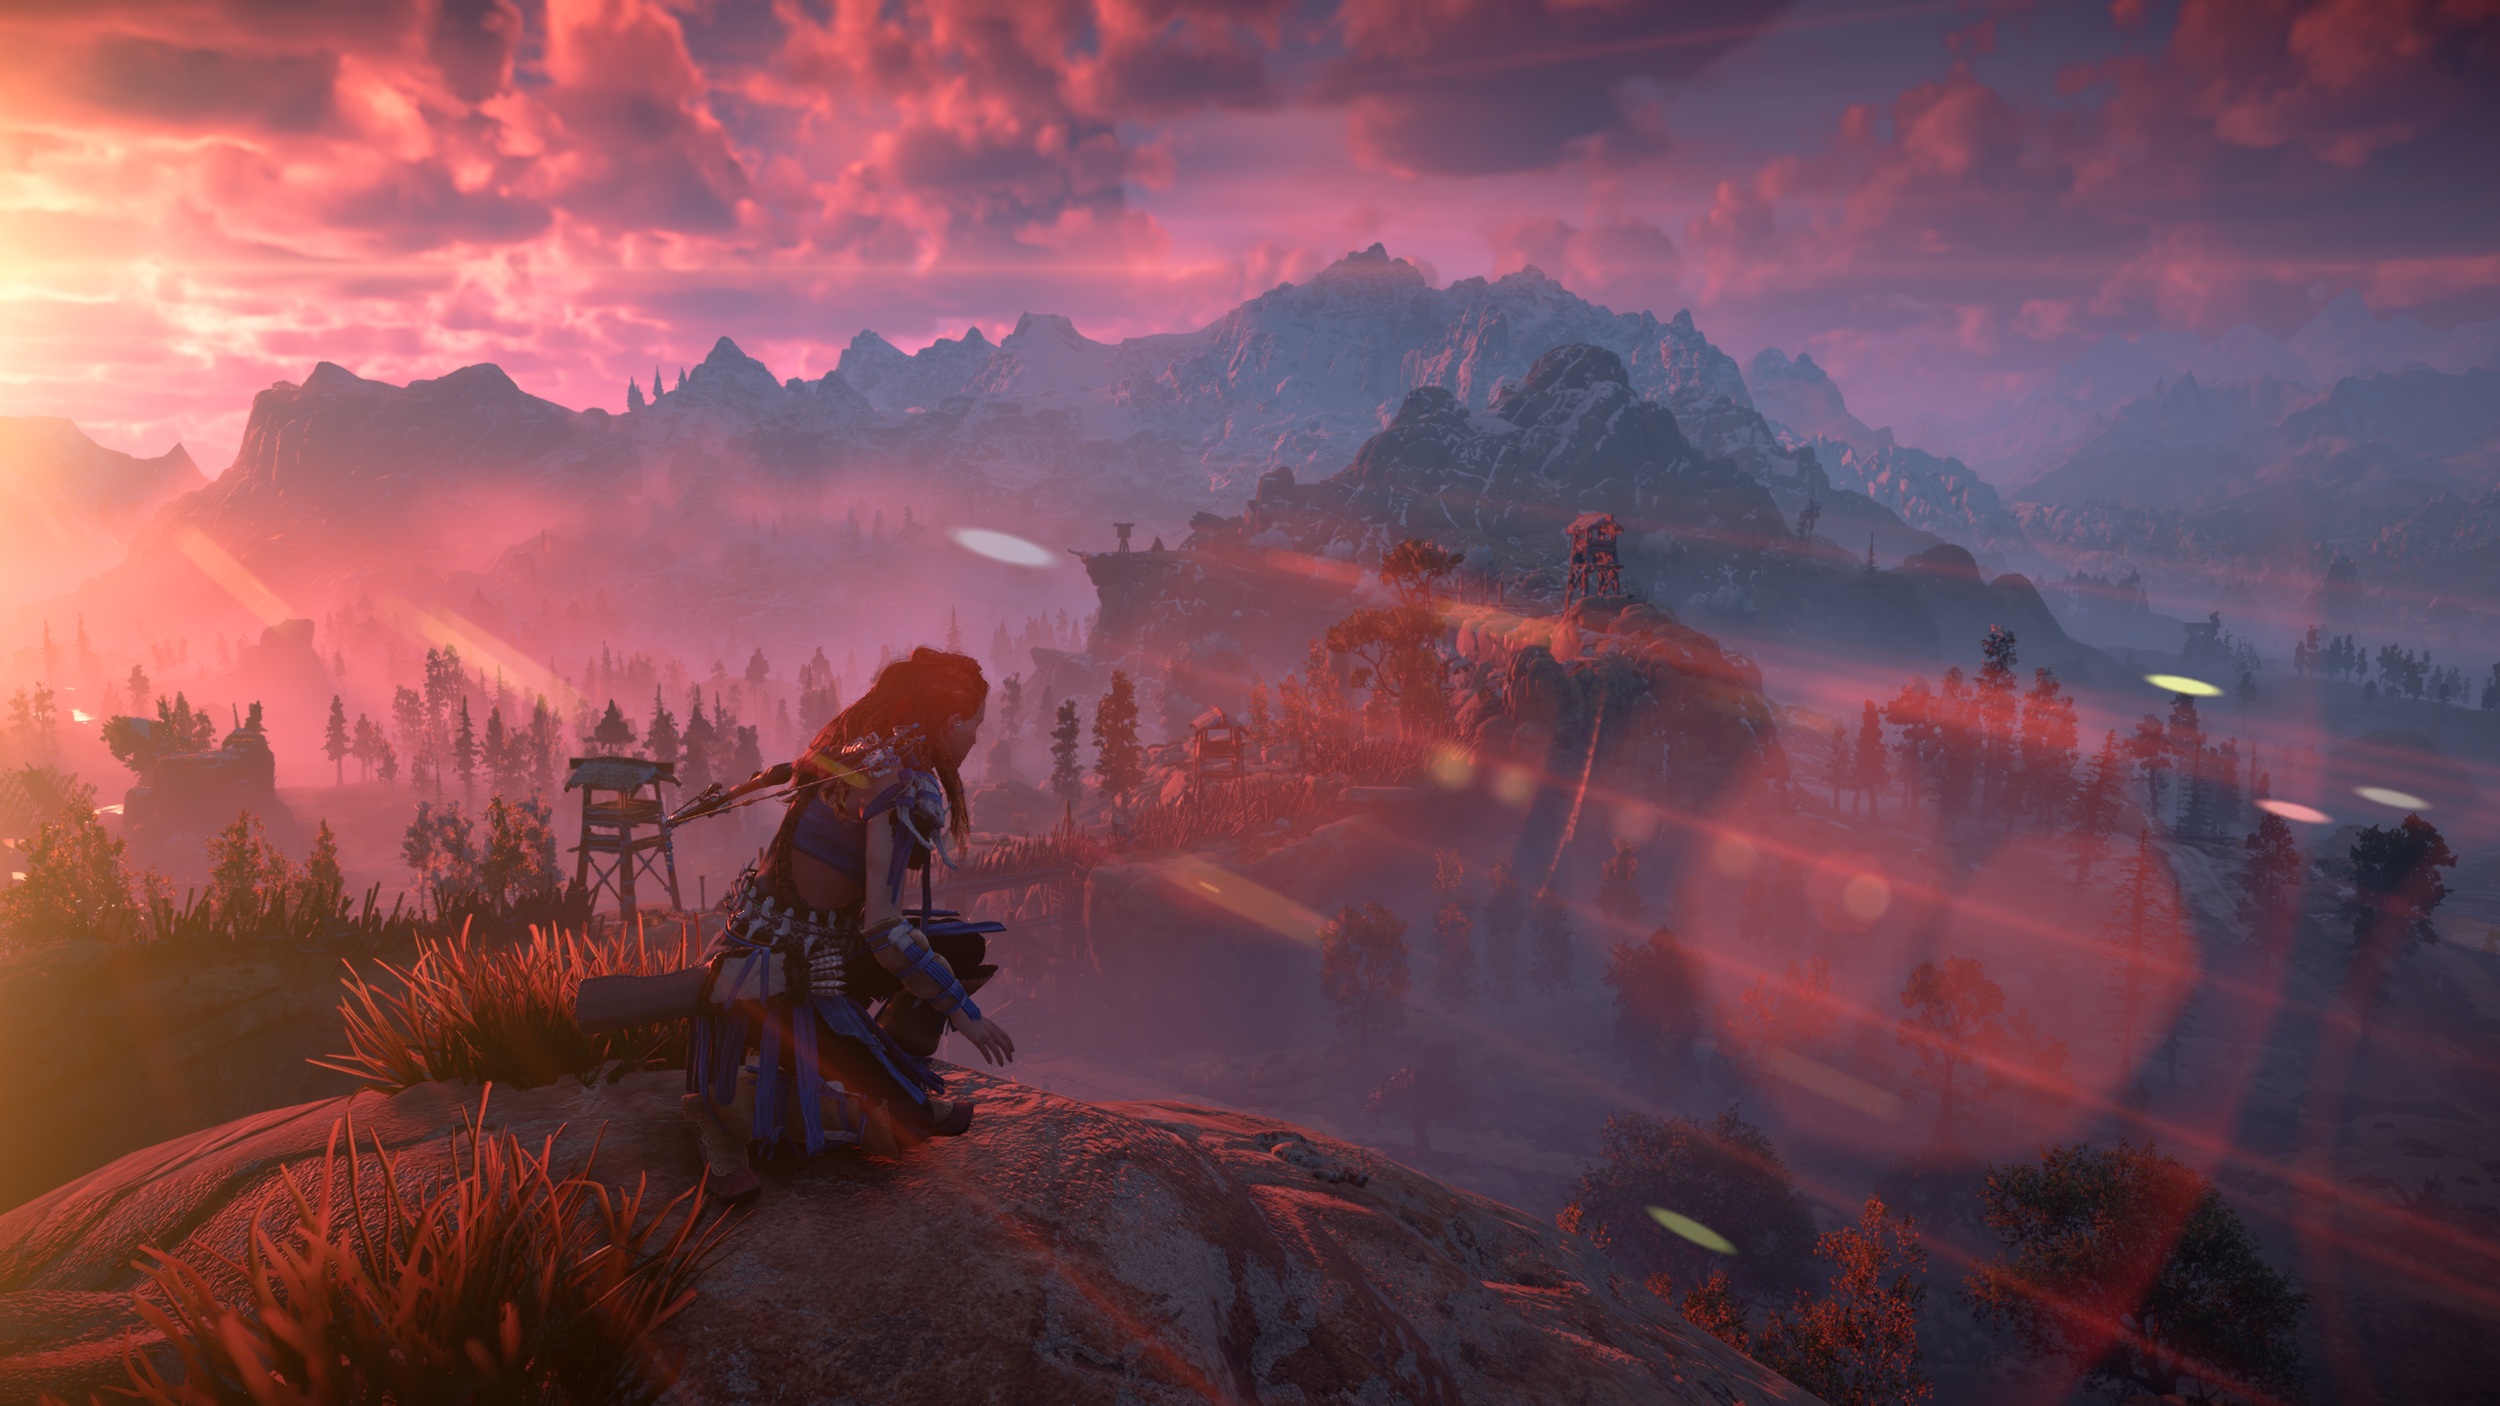 metacritic on X: Horizon: Zero Dawn - Complete Edition [PC - 85] reviews  are coming in now:  JeuxVideo: Horizon Zero Dawn  looks stunning on PC.  / X